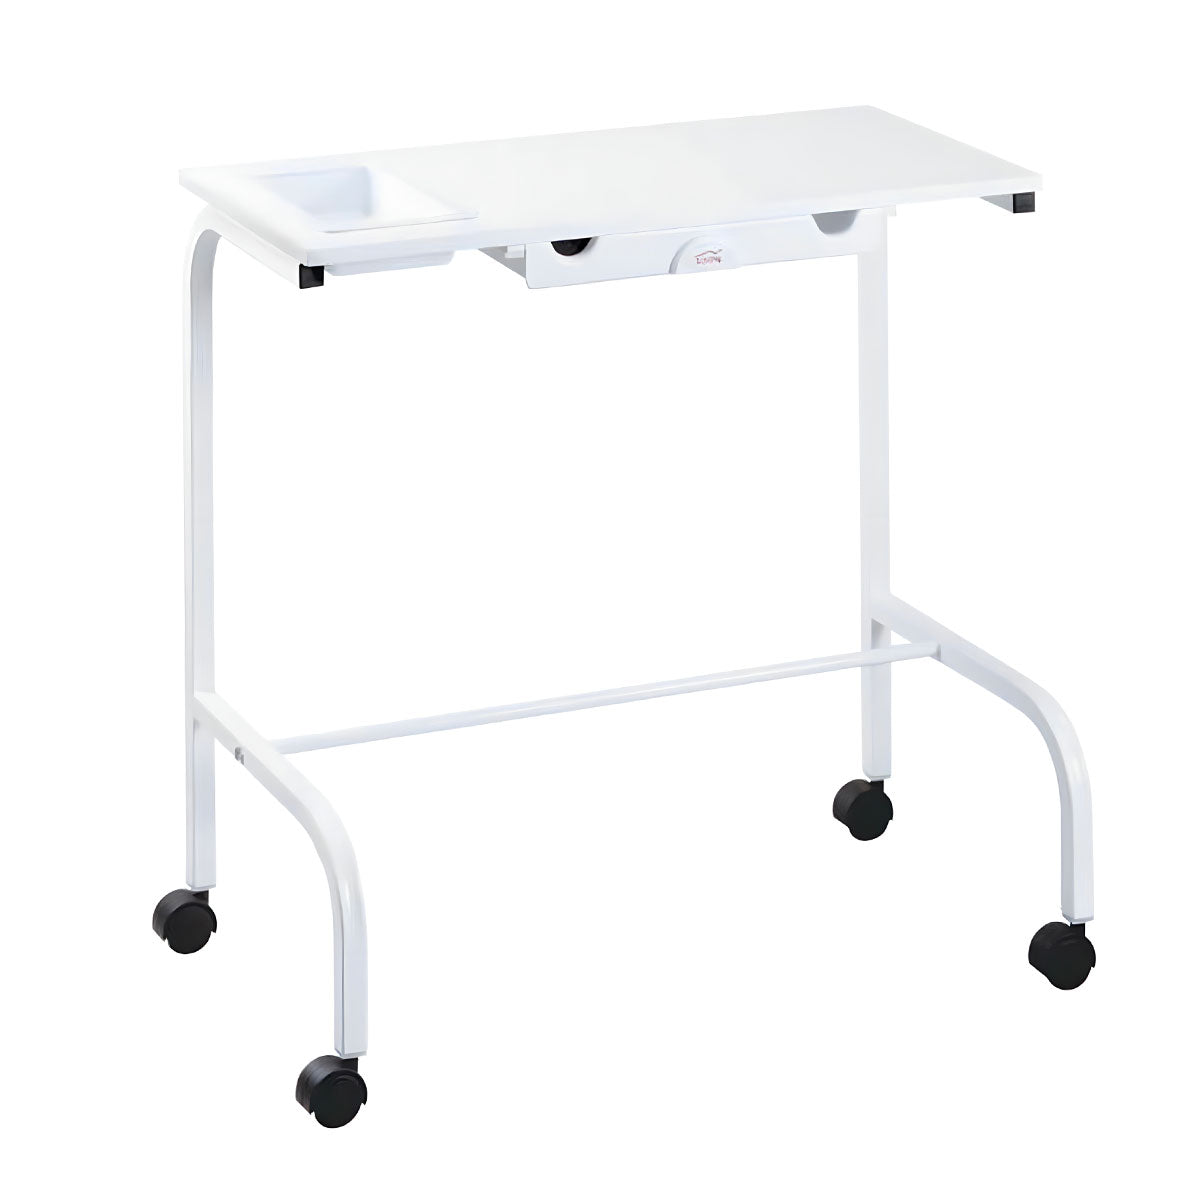 SPAMARC . TROLLEY . 011 . Basic . Manicure Table